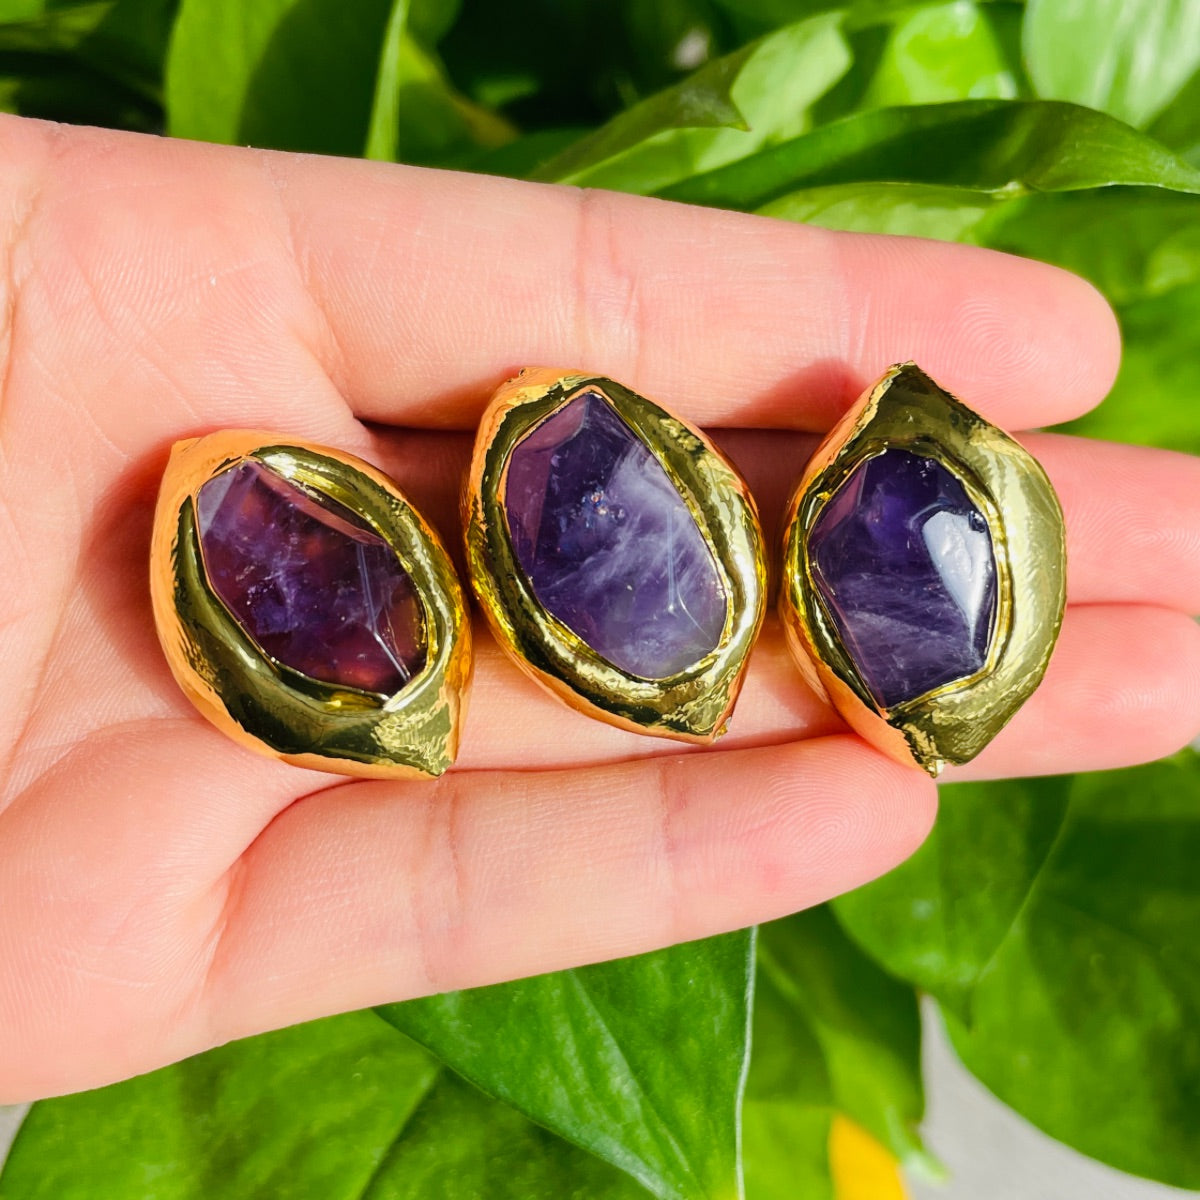 2-5-10pcs/lot Gold Plated Purple Amethyst Spacers Focal Beads Focal Beads Focal Beads Charms Beads Beyond